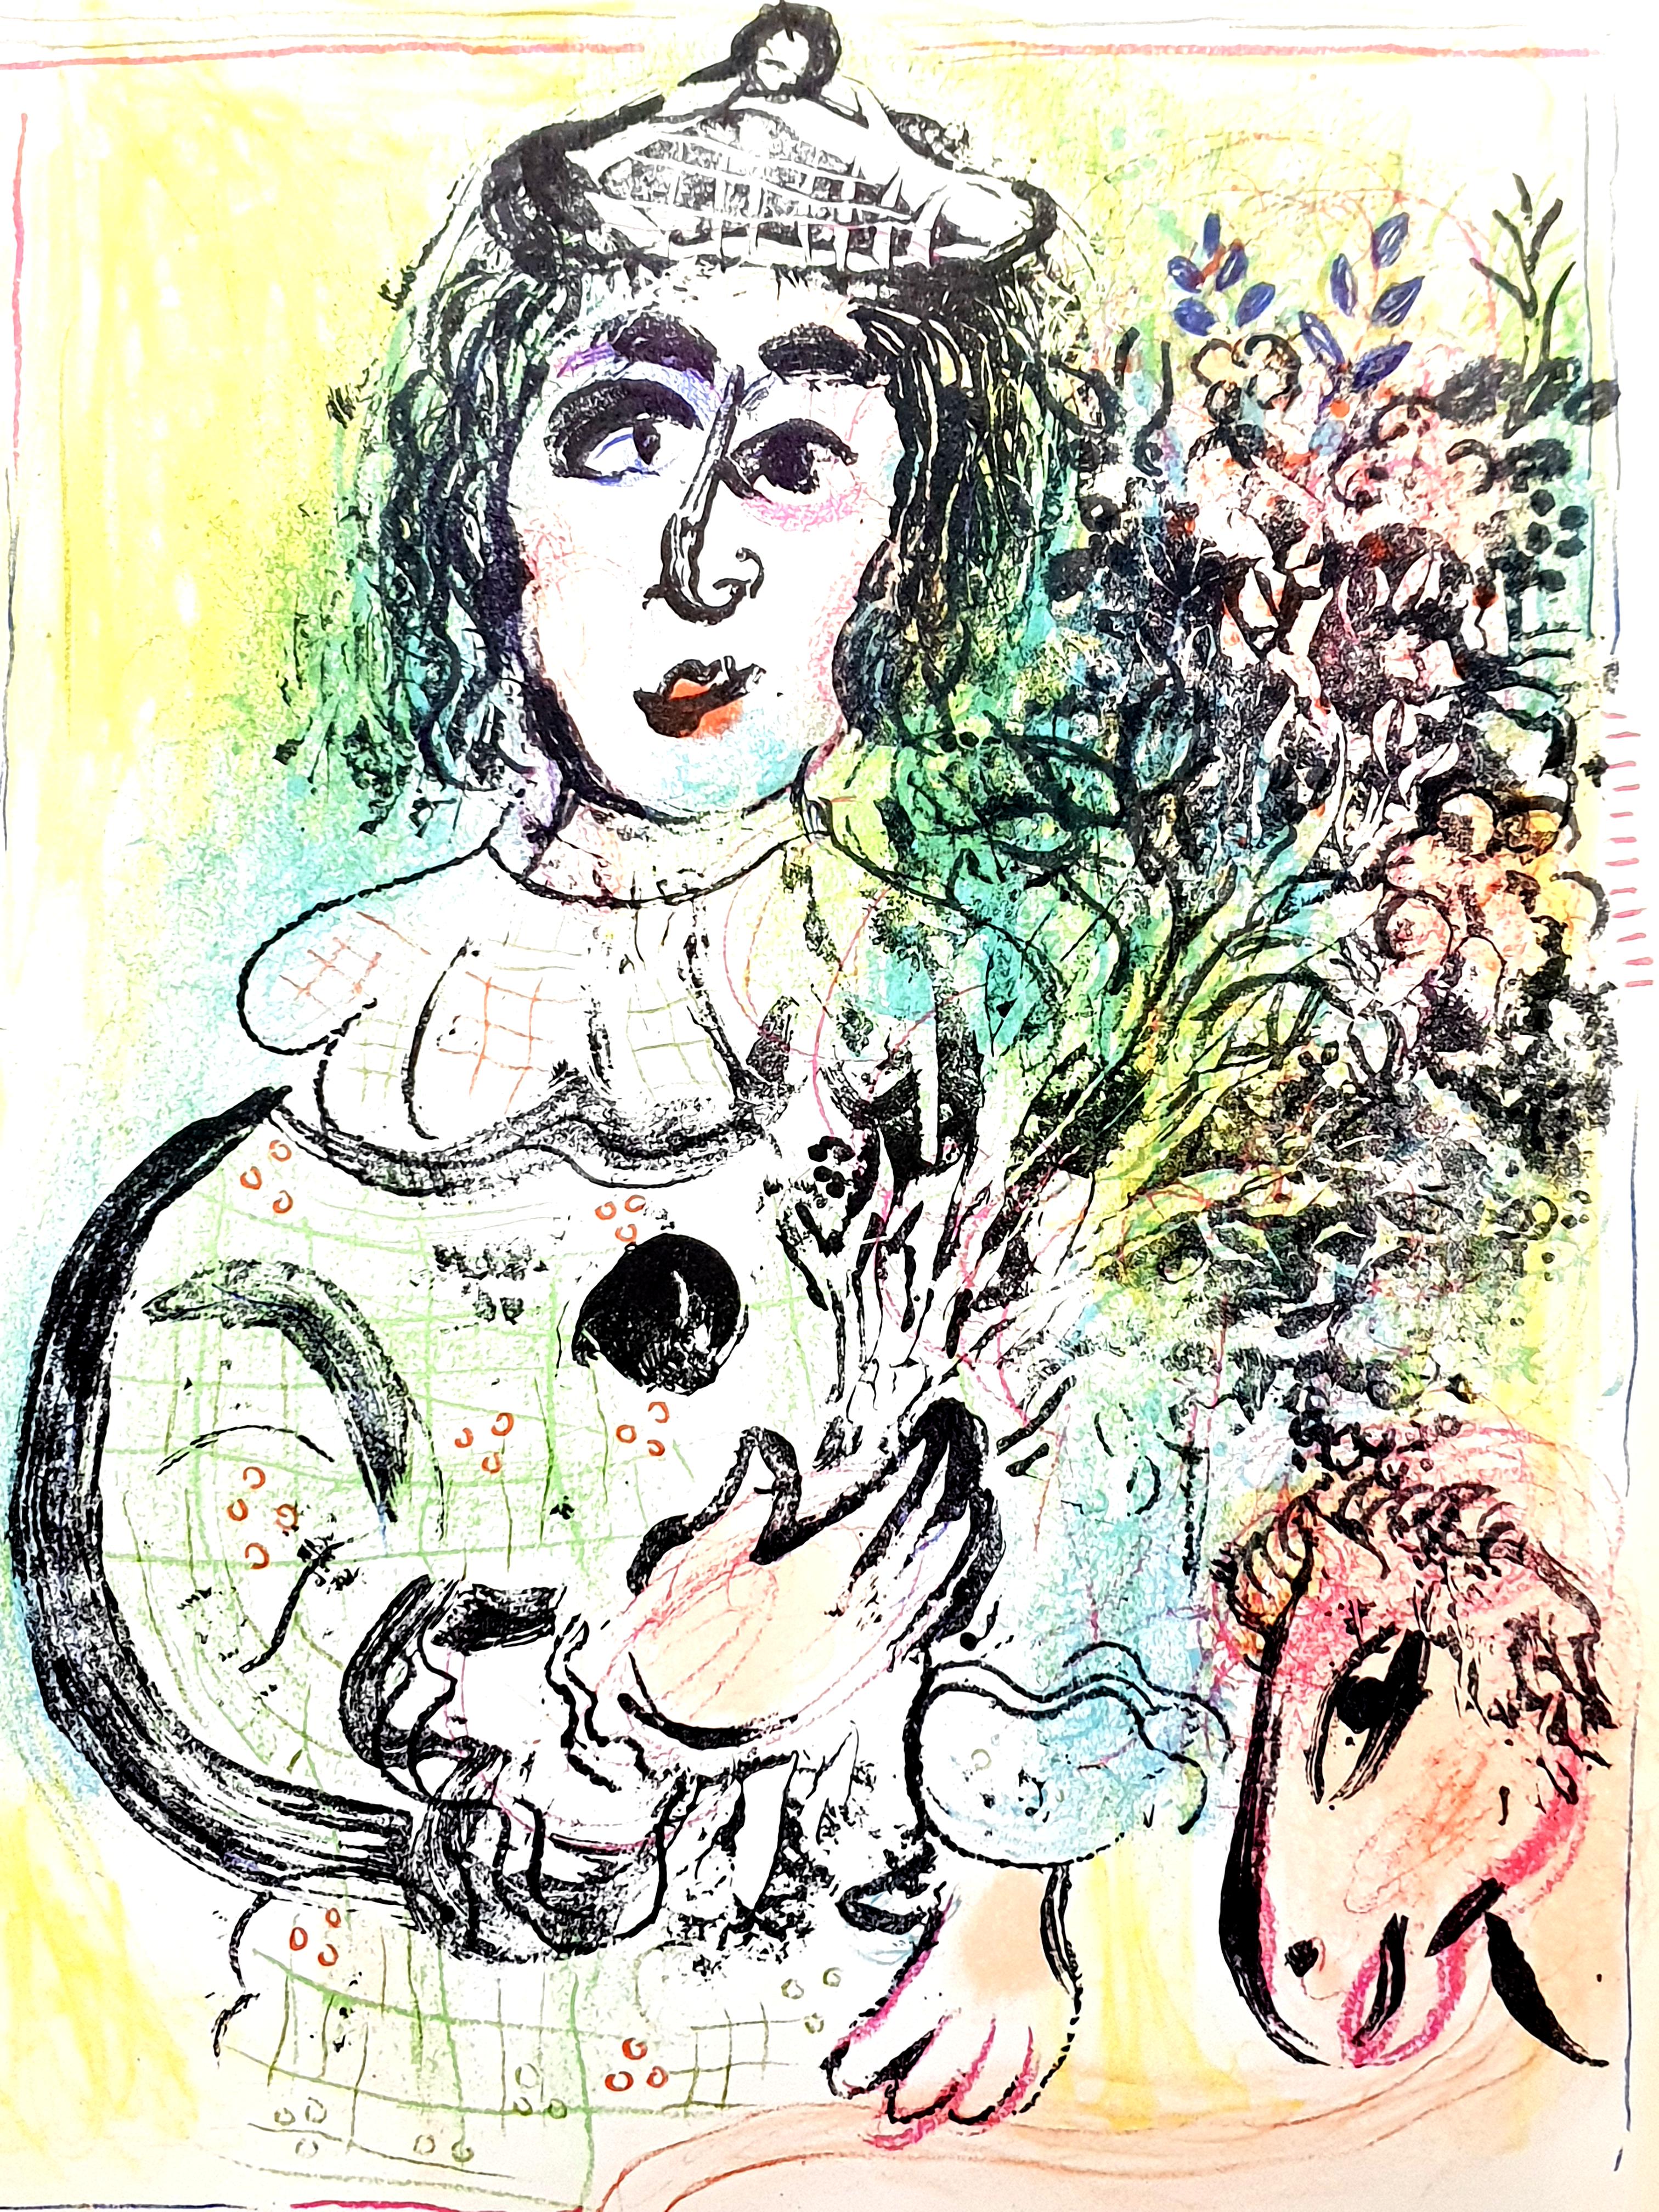 Marc Chagall
Original Lithograph
1963
Dimensions: 32 x 24 cm
From Chagall Lithograph II
Reference: Mourlot 399
Condition : Excellent
Unsigned and unumbered as issued